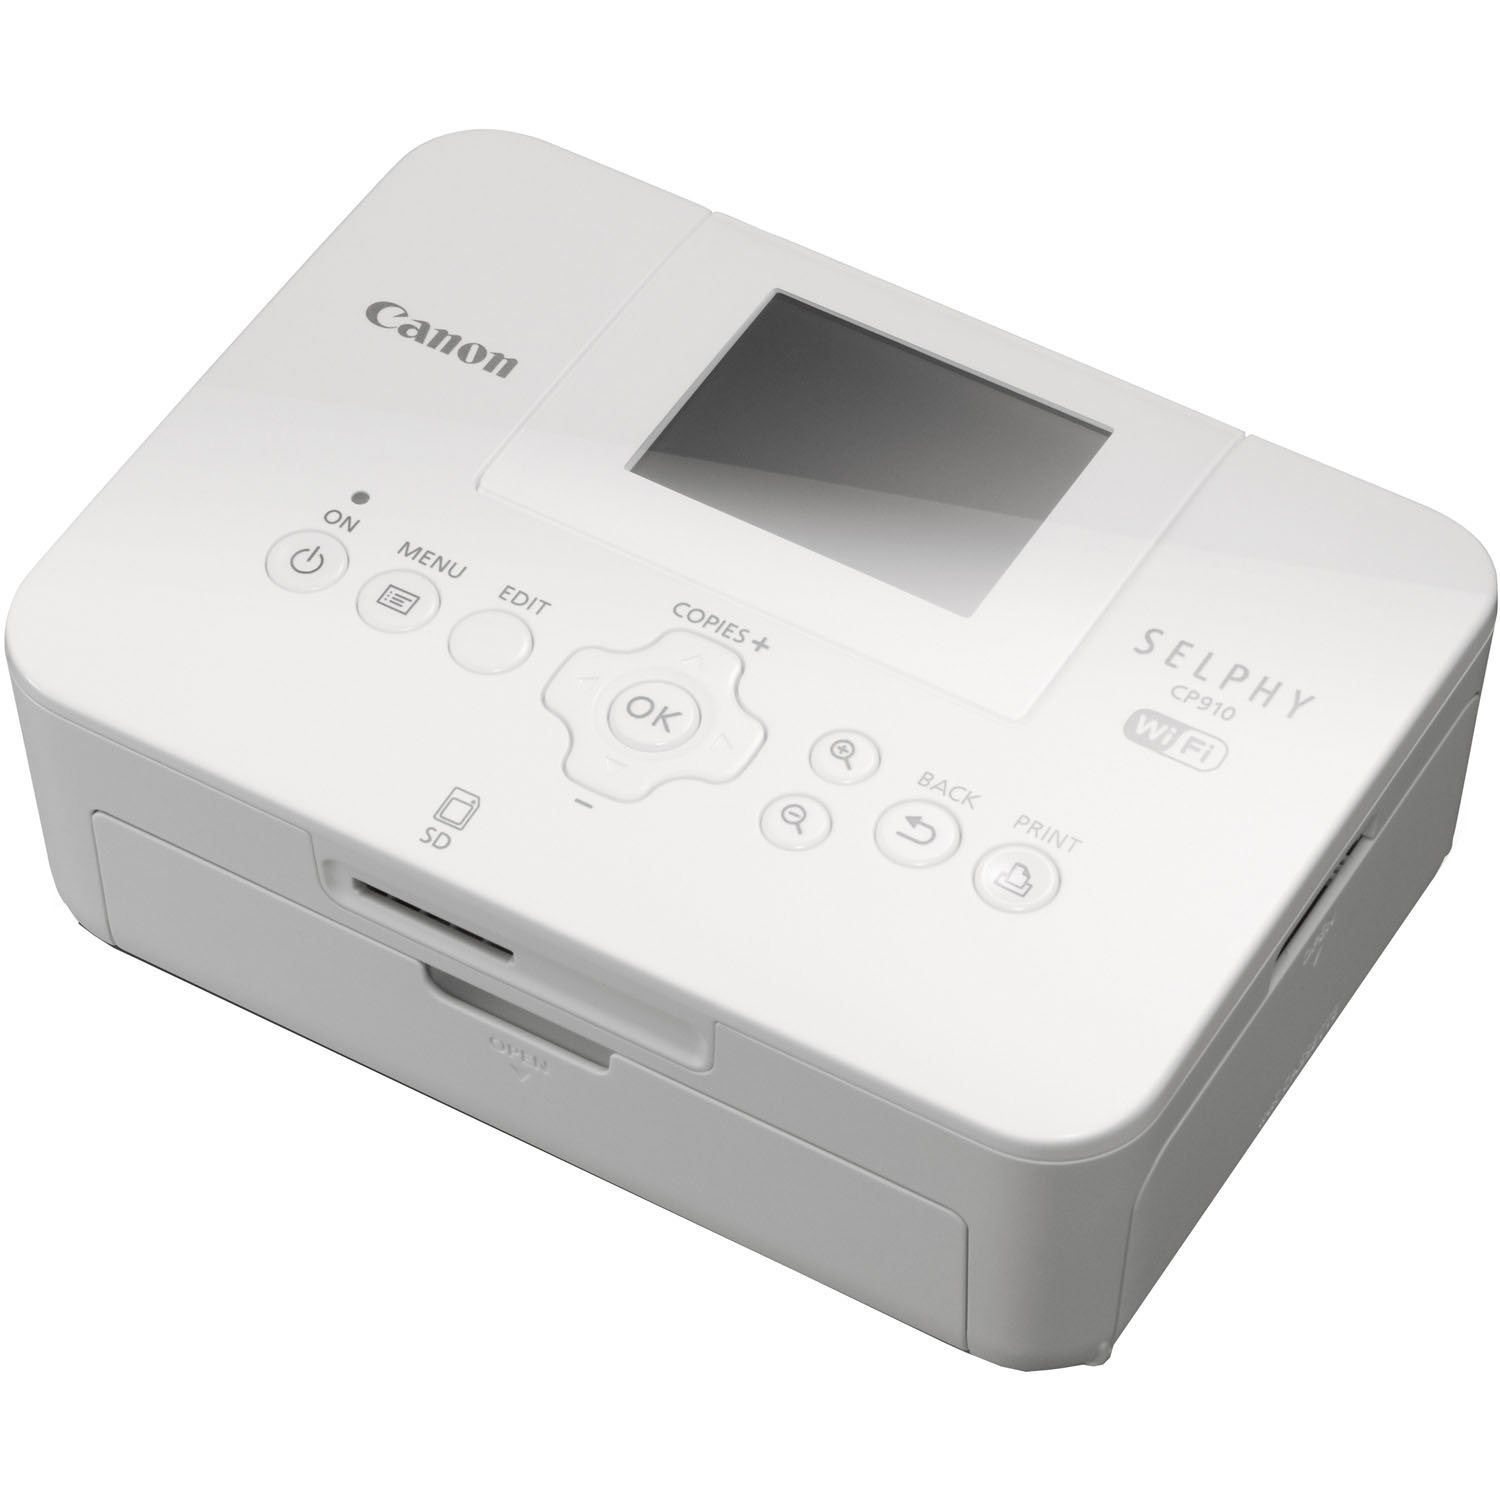 Canon Selphy Cp910 Compact Photo Color Printer Wireless Portable Black Discontinued By 5052